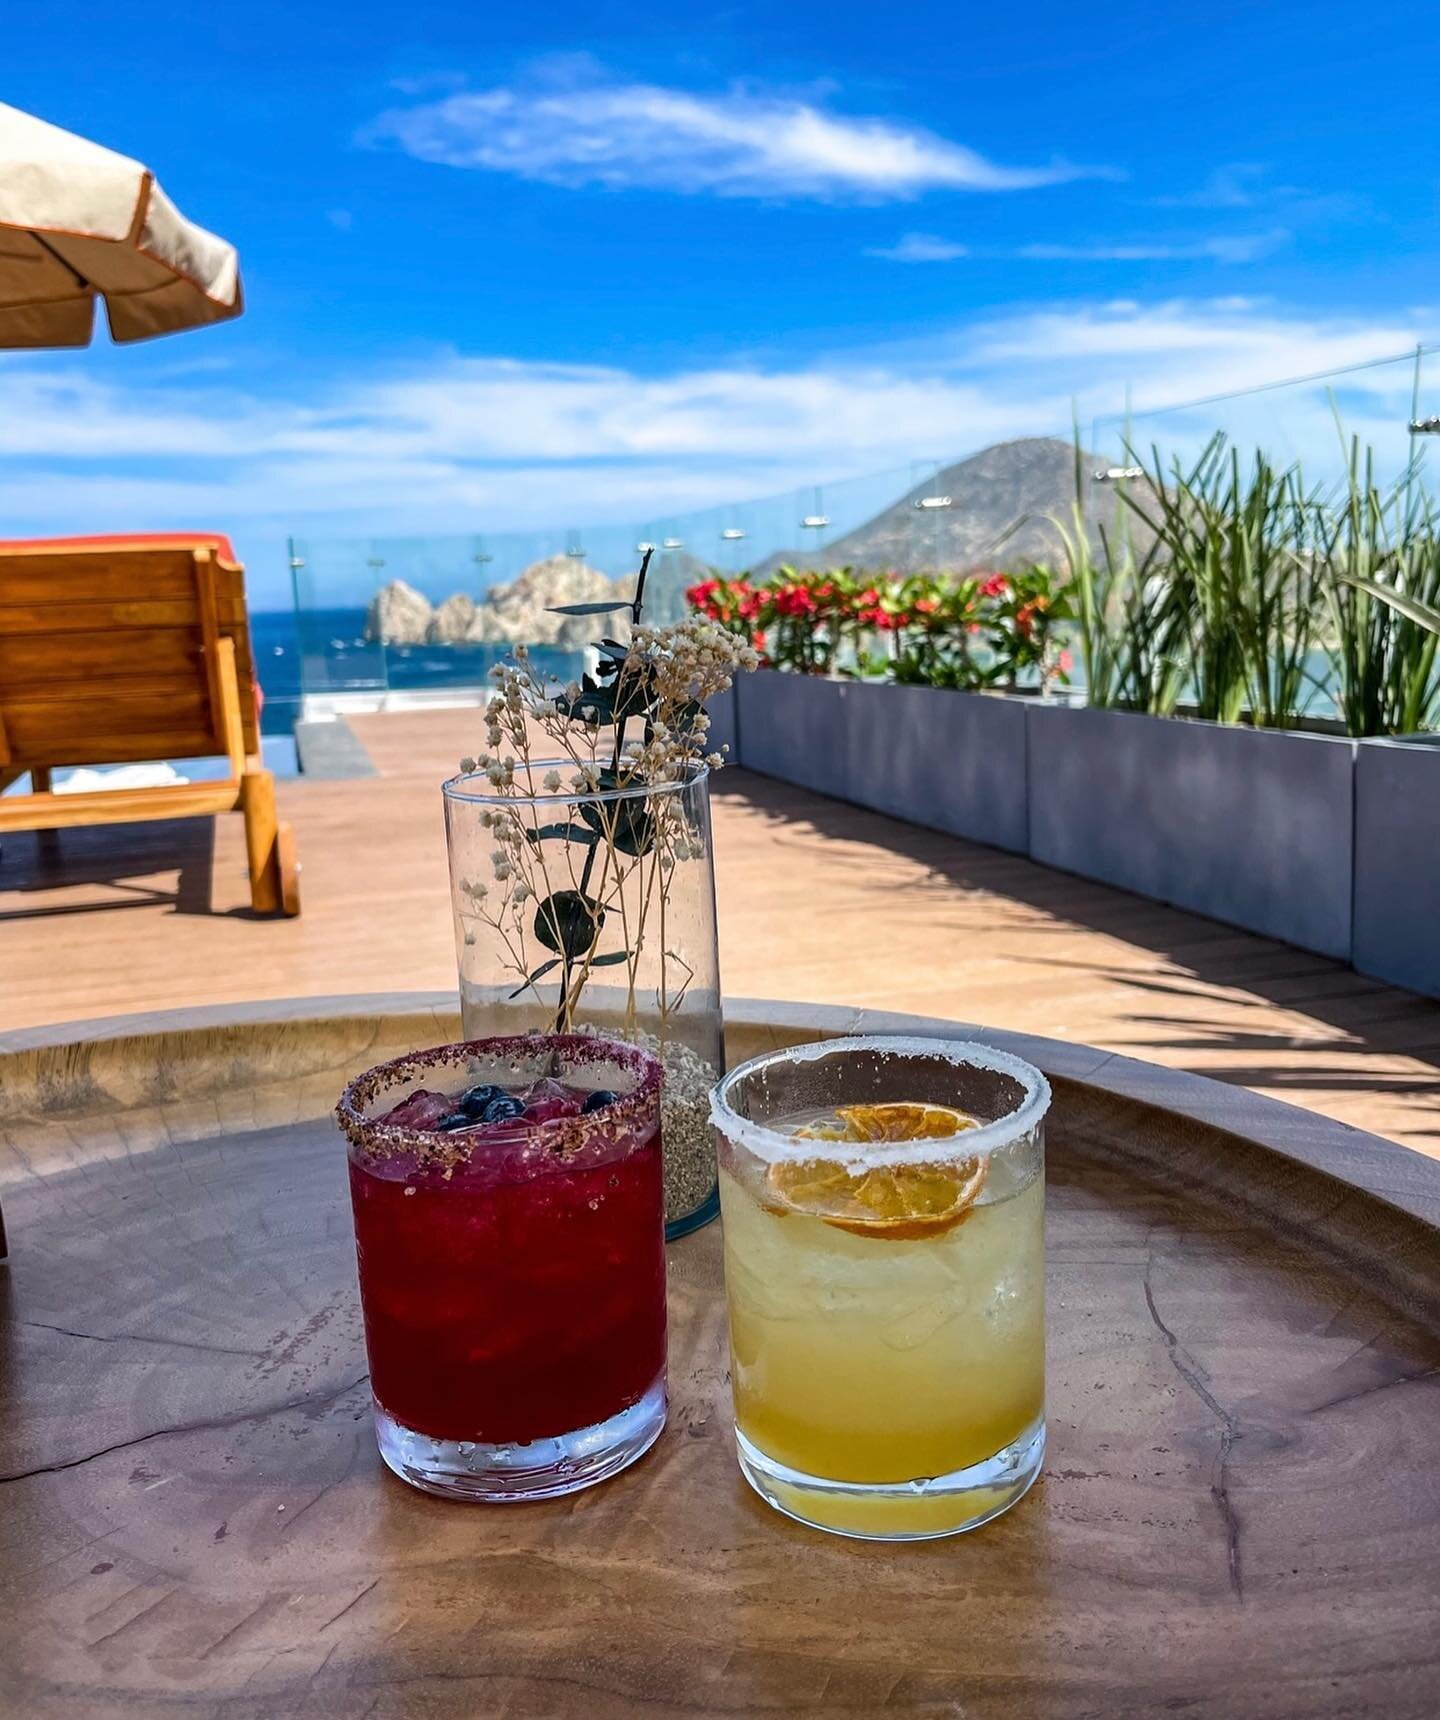 Going up... on a Tuesday.

🆆🅷🅰🆃 Hop on the elevator and head to the rooftop for cocktails with the most scenic view of beautiful San Lucas. Delicious hibiscus and l&iacute;mon mezcalitas are the perfect afternoon refresher.

🆆🅷🅴🆁🅴 @theroofto